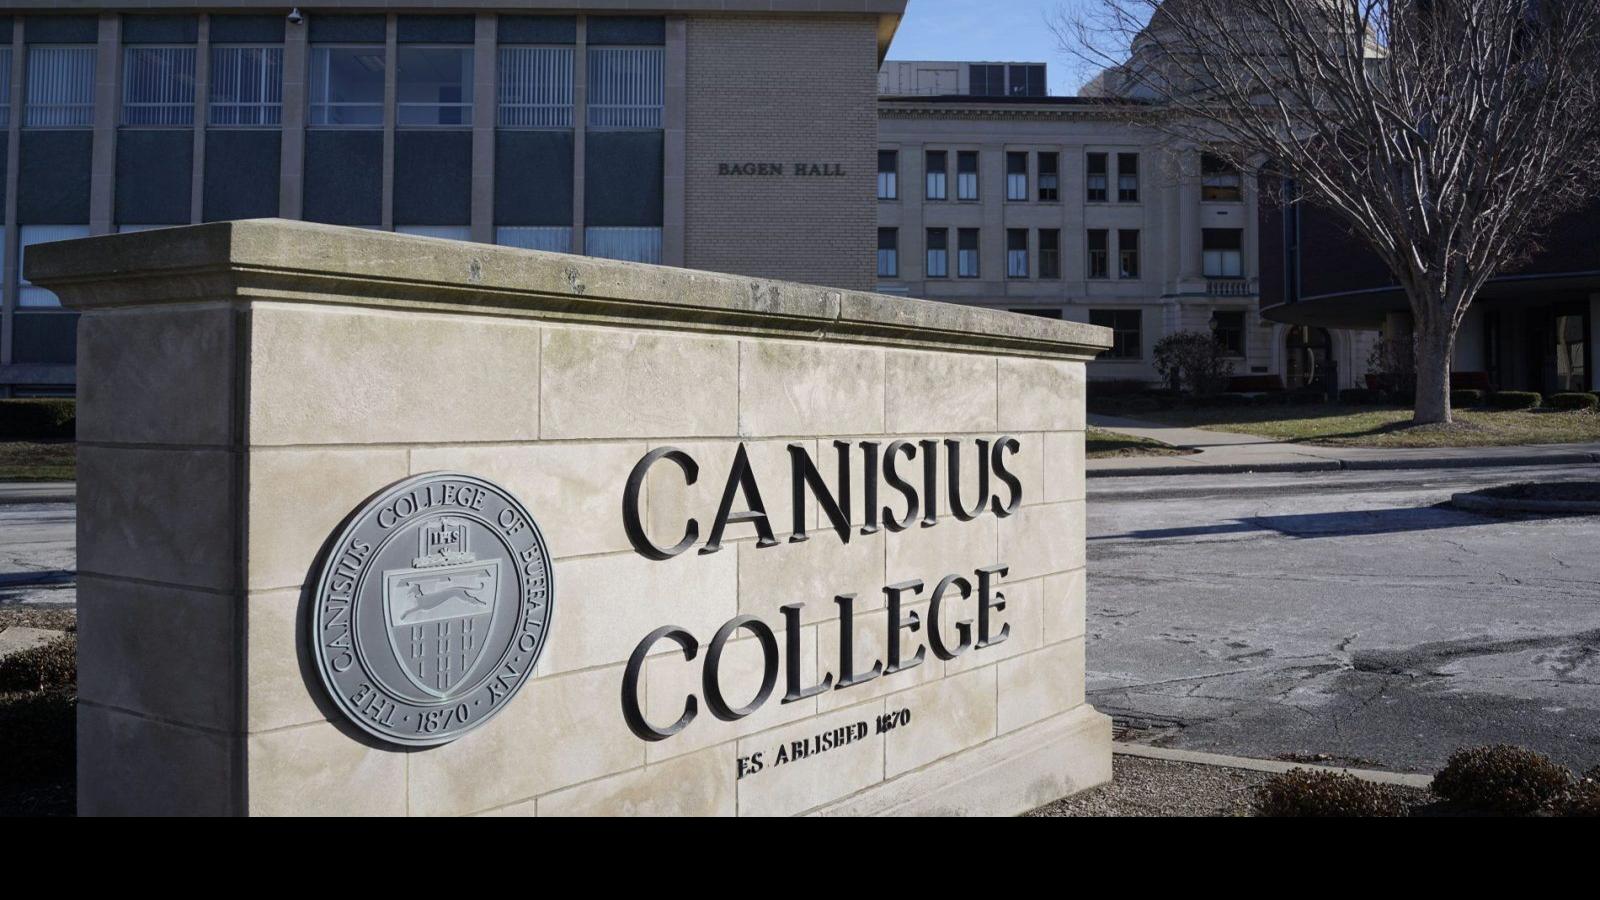 Canisius College host by Fordham University Tuesday | News | buffalonews.com